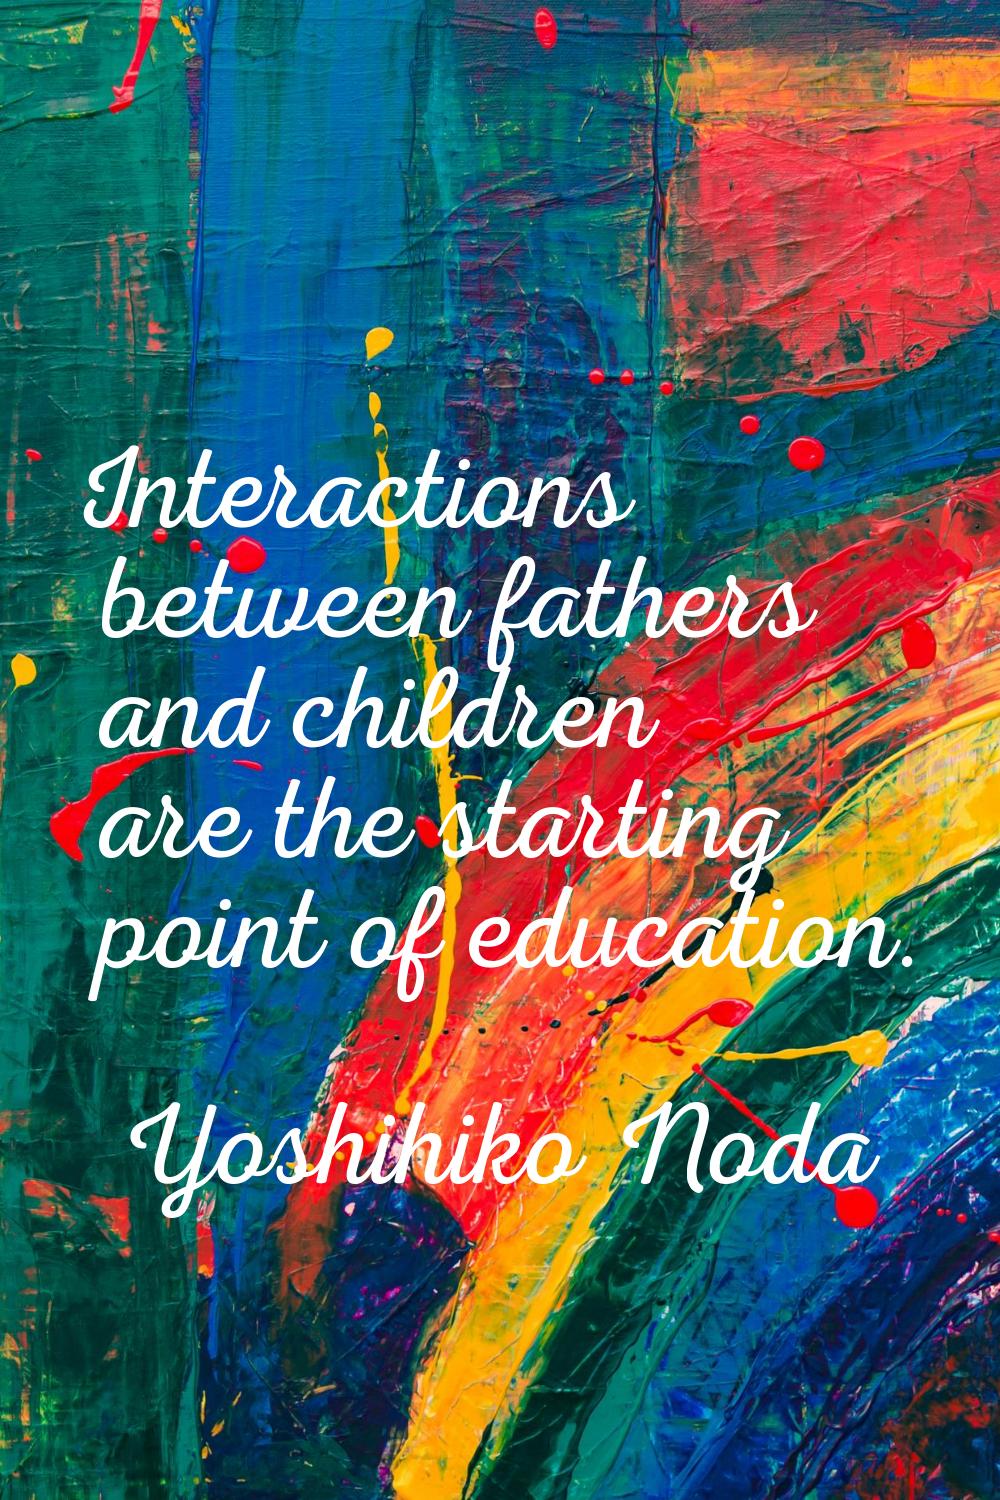 Interactions between fathers and children are the starting point of education.